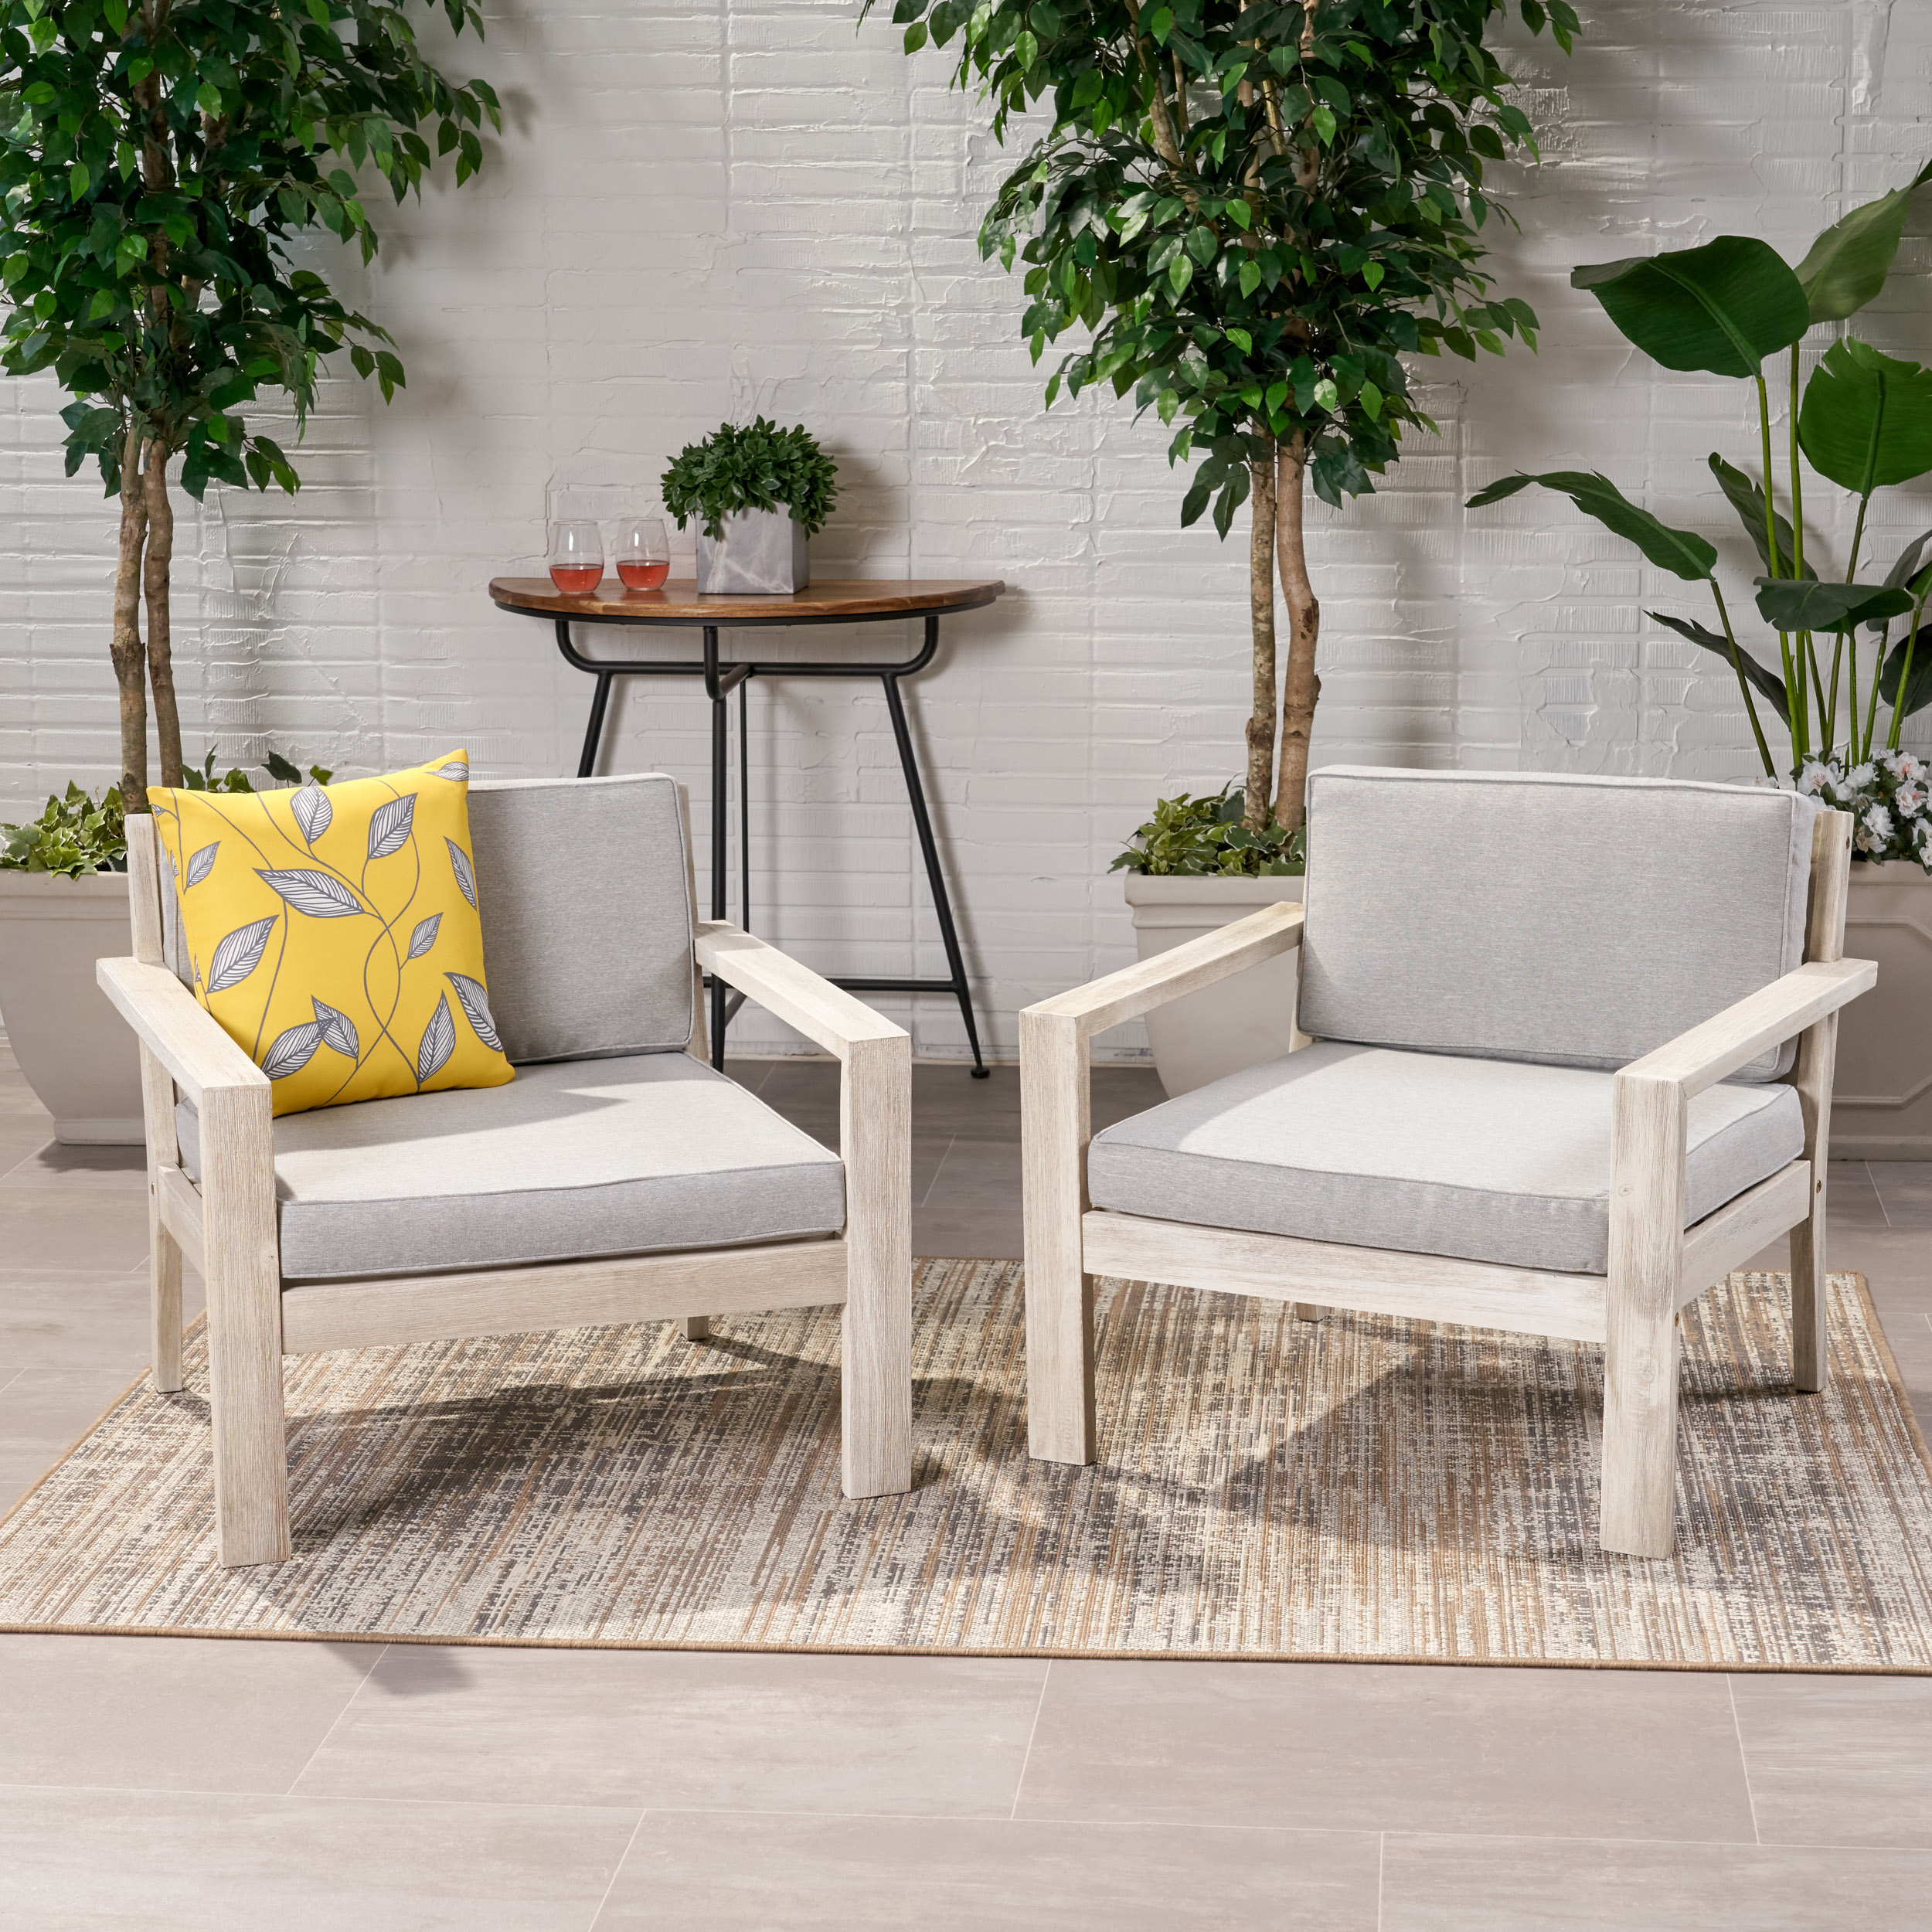 Beryl Outdoor Acacia Wood Club Chairs With Cushions (Set Of 2) - Brushed Light Gray Wash, Light Gray